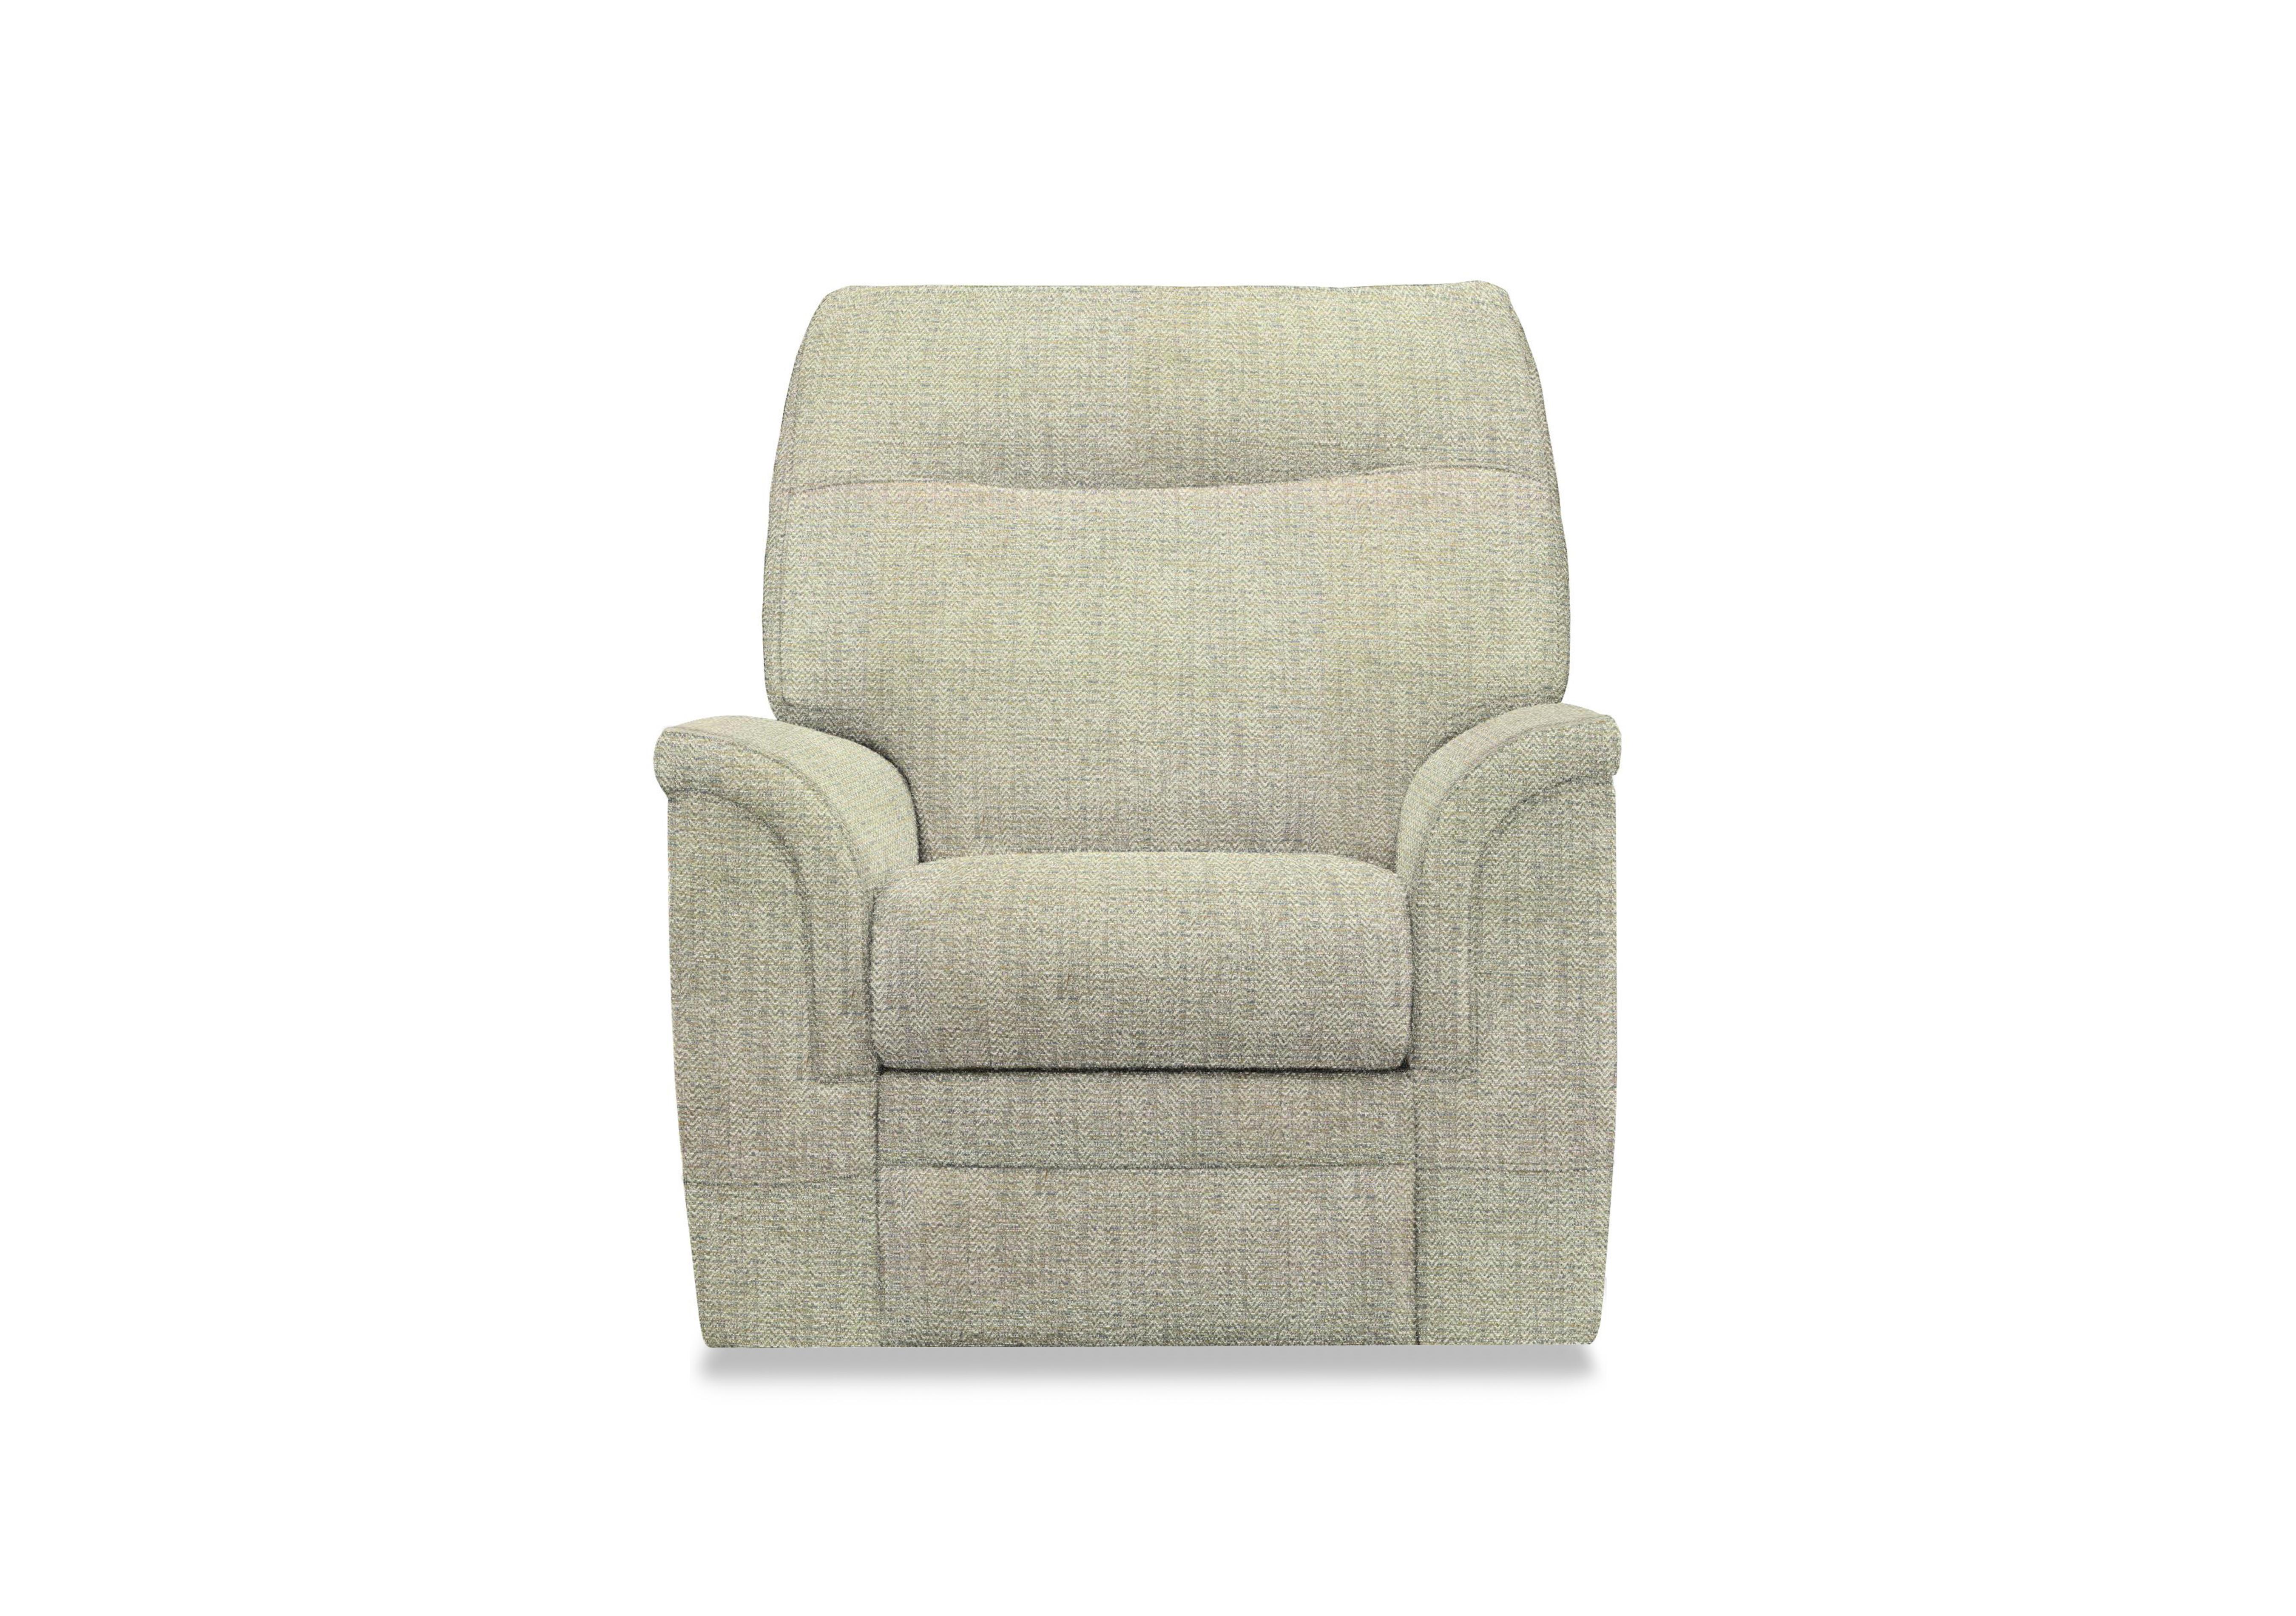 Hudson 23 Fabric Lift and Rise Chair in Cromwell Mint 001355-0069 on Furniture Village